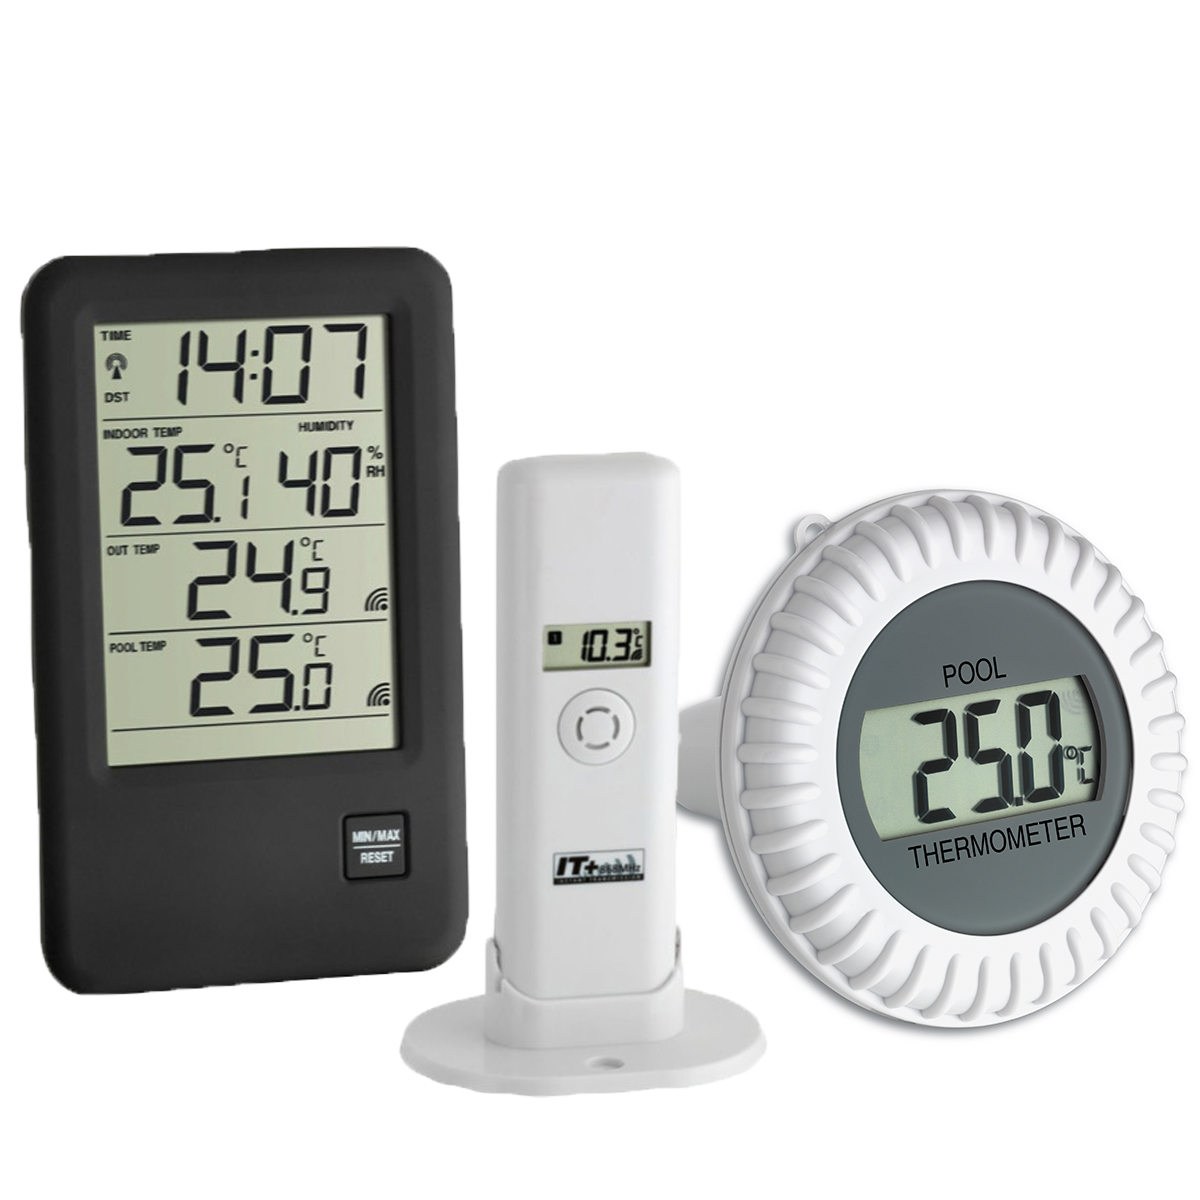 Swimming pool thermometers – Thermometre.fr